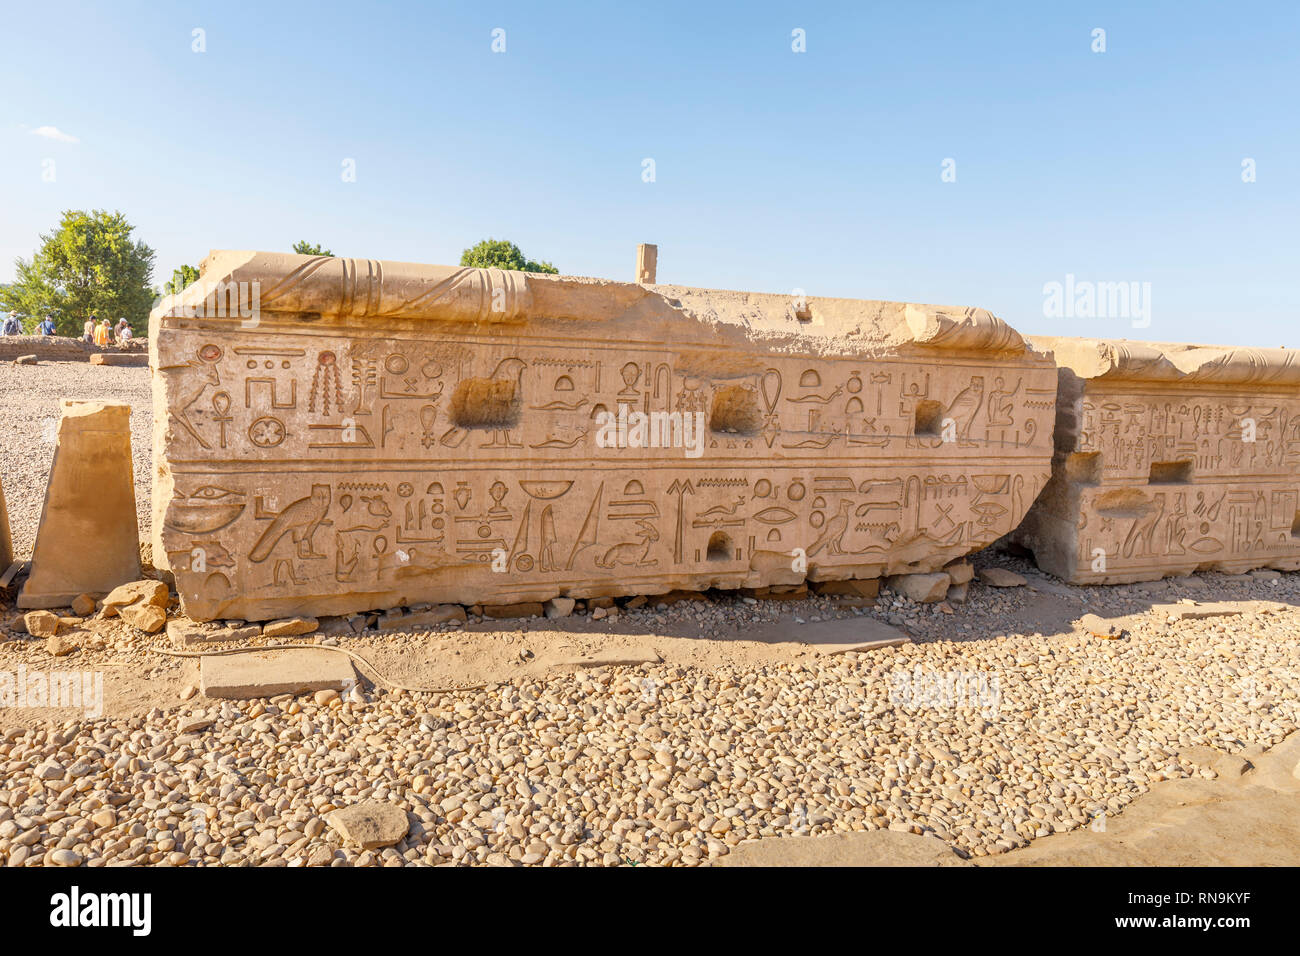 Hieroglyphs on a large stone at the Temple of Kom Ombo, Temple of Sobek, an unusual double temple from the Ptolomeic dynasty in Upper Egypt Stock Photo